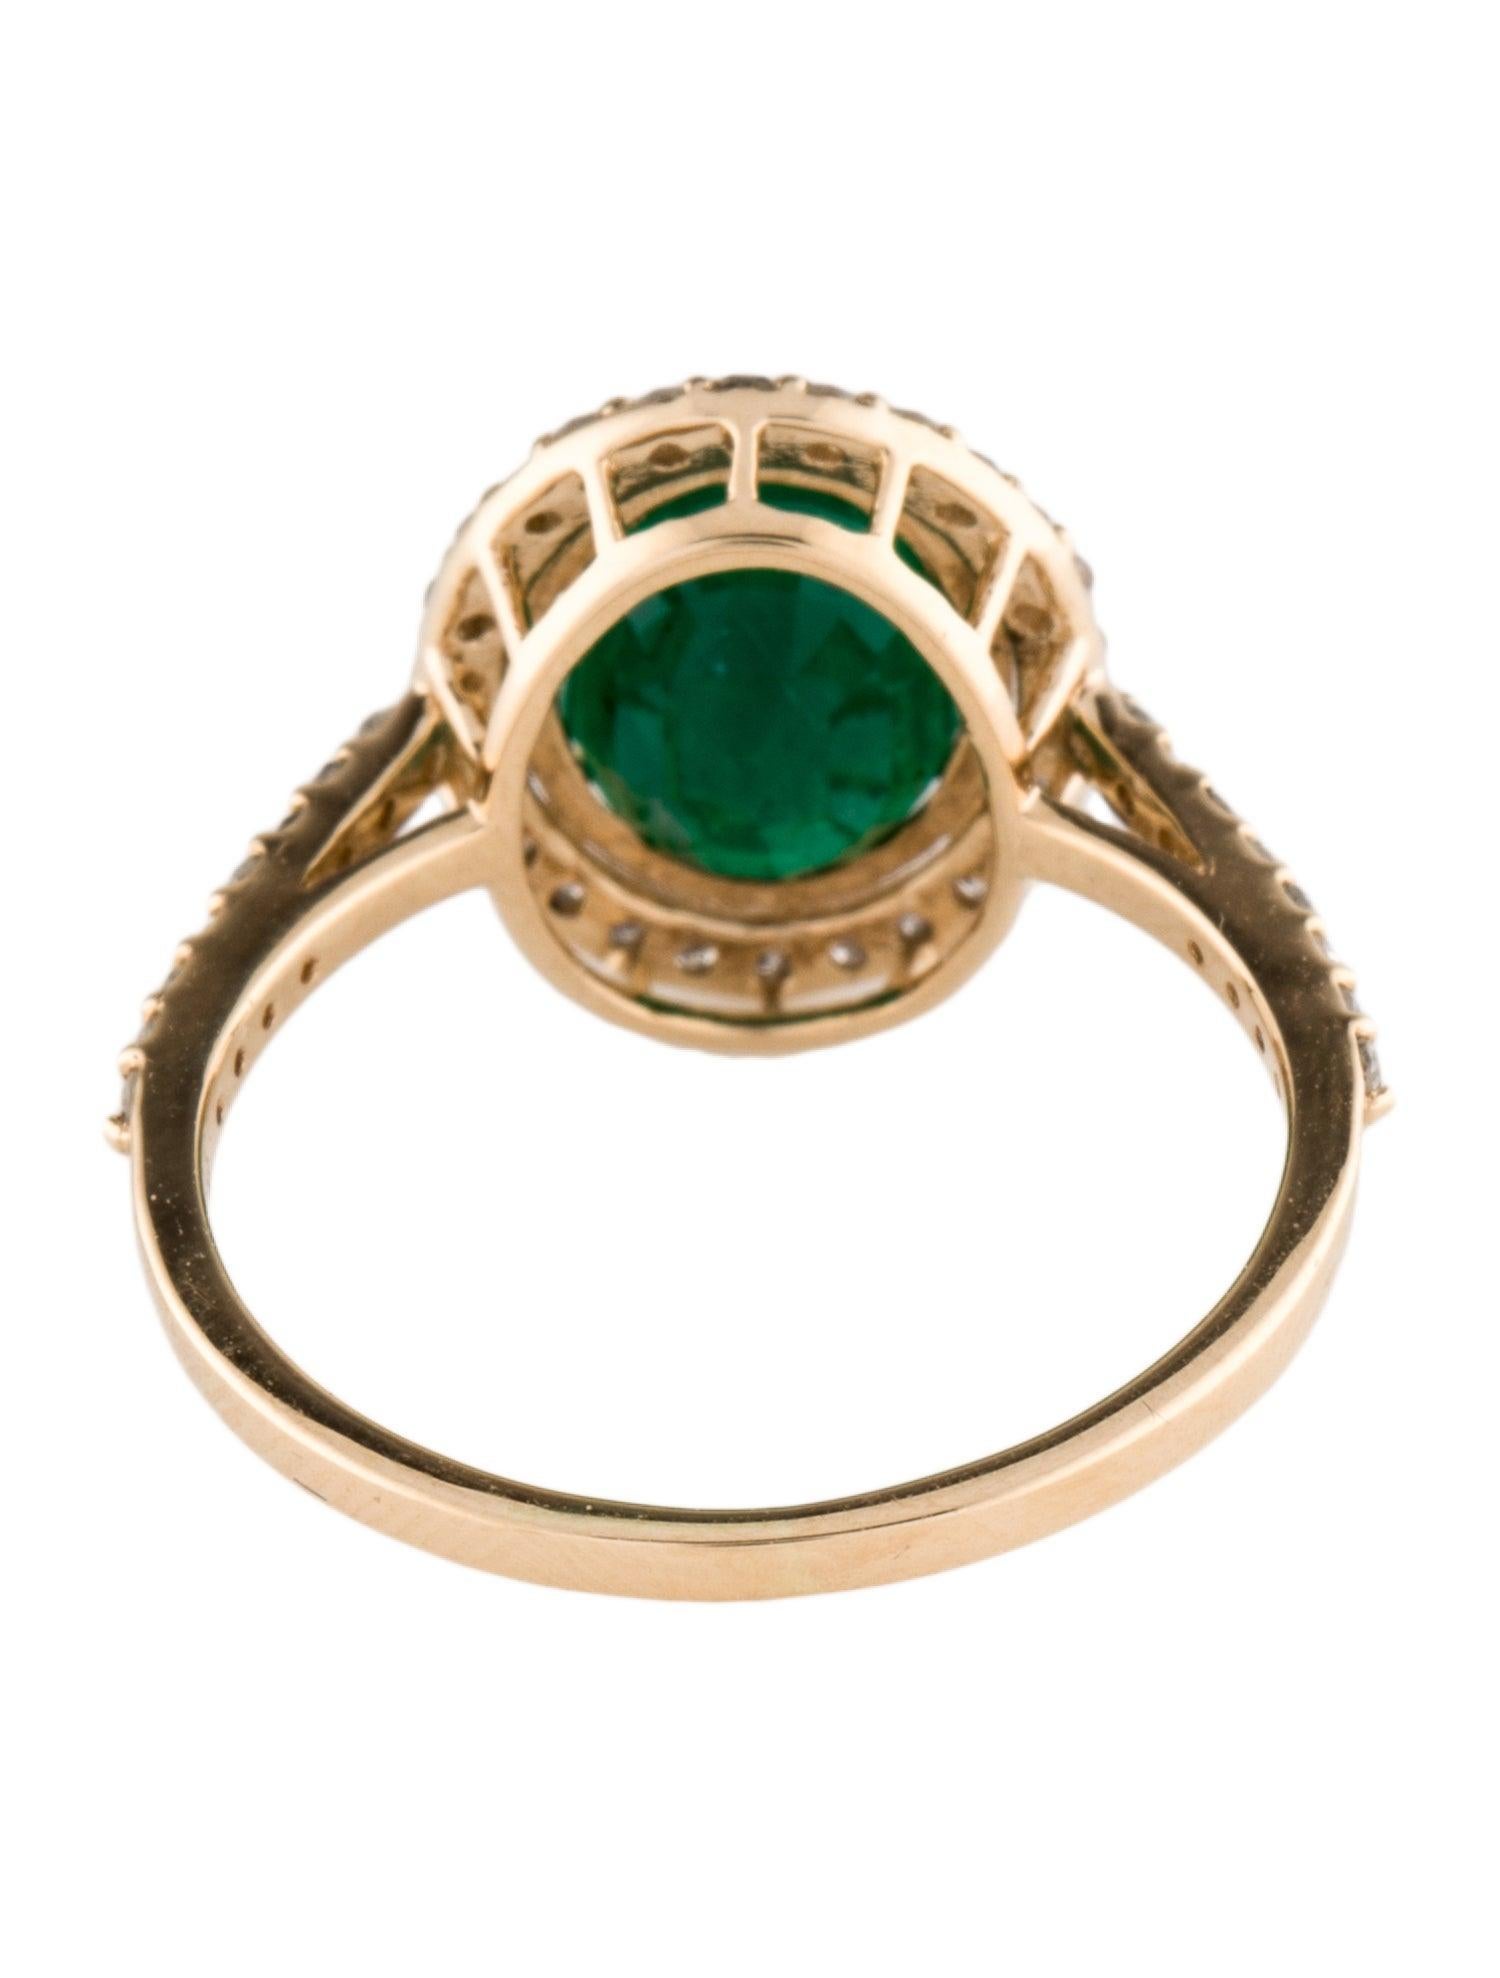 14K Yellow Gold 1.91ct Oval Brilliant Emerald & Diamond Cocktail Ring, Size 7 In New Condition For Sale In Holtsville, NY